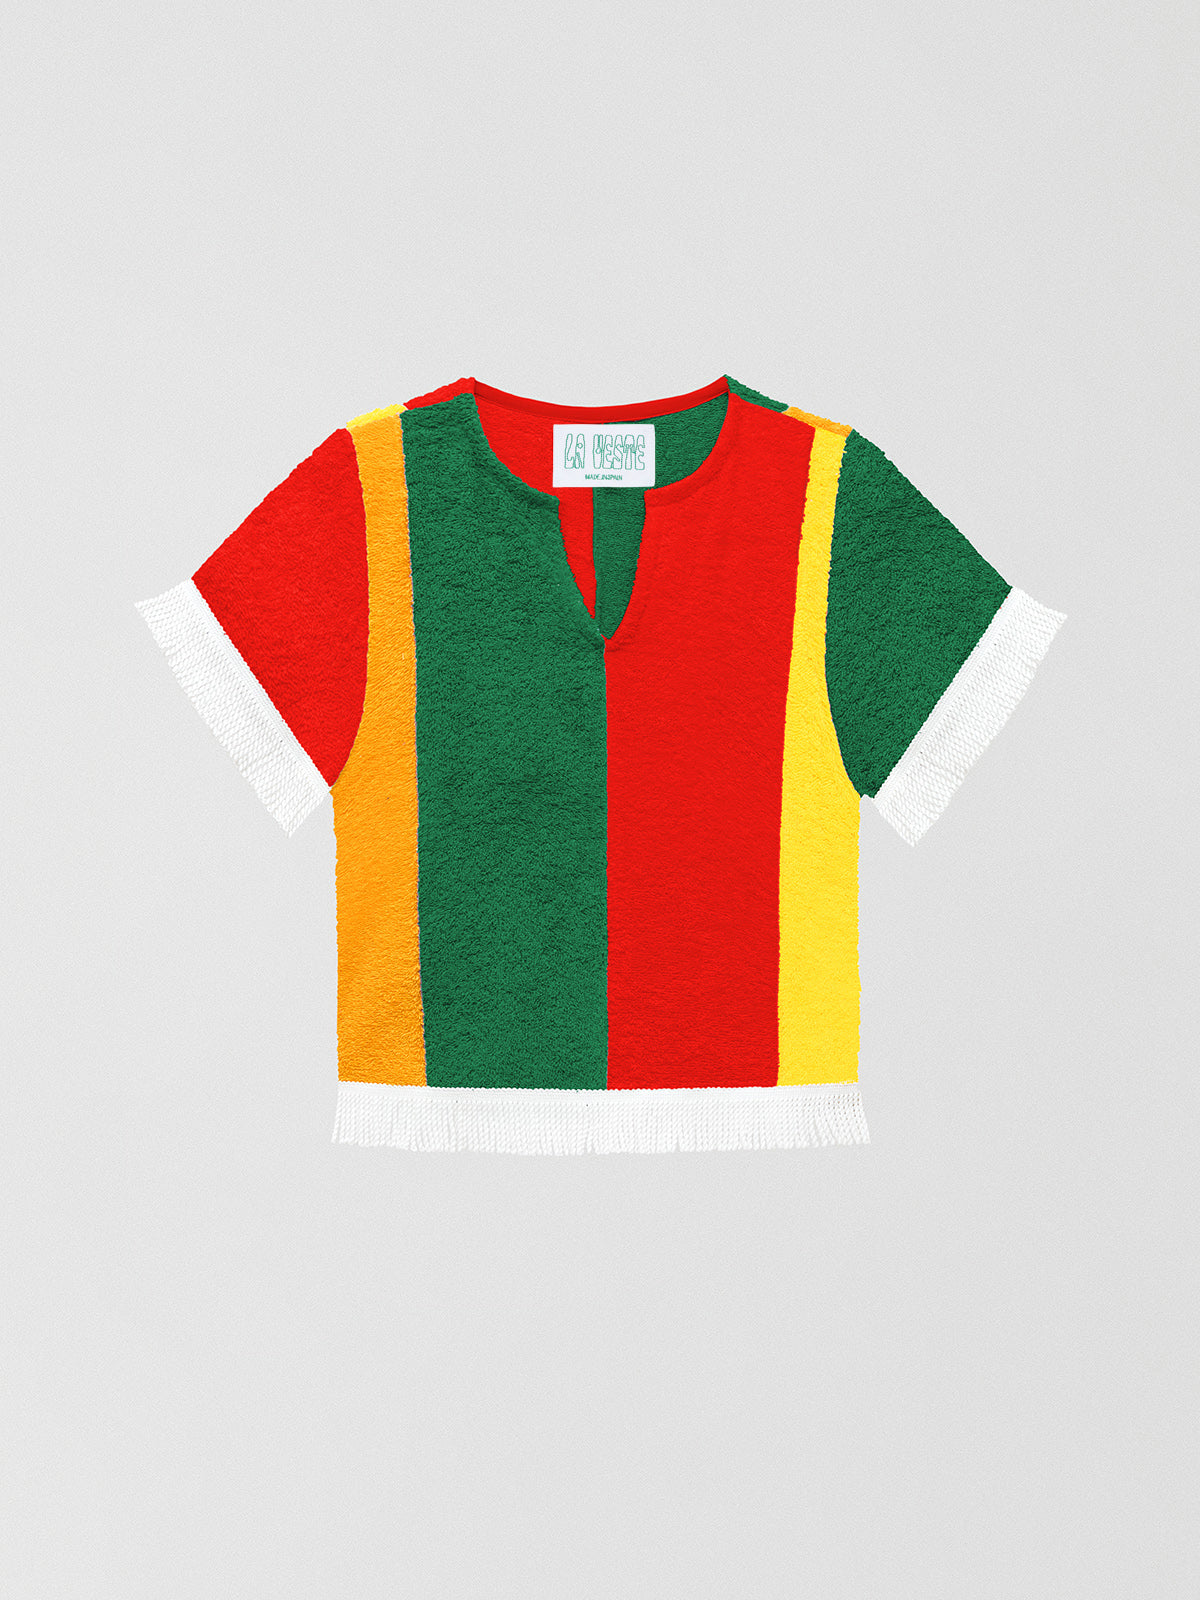 Skittle Towel Shirt 02 is a tricolor top made of red, yellow and green towel fabric.